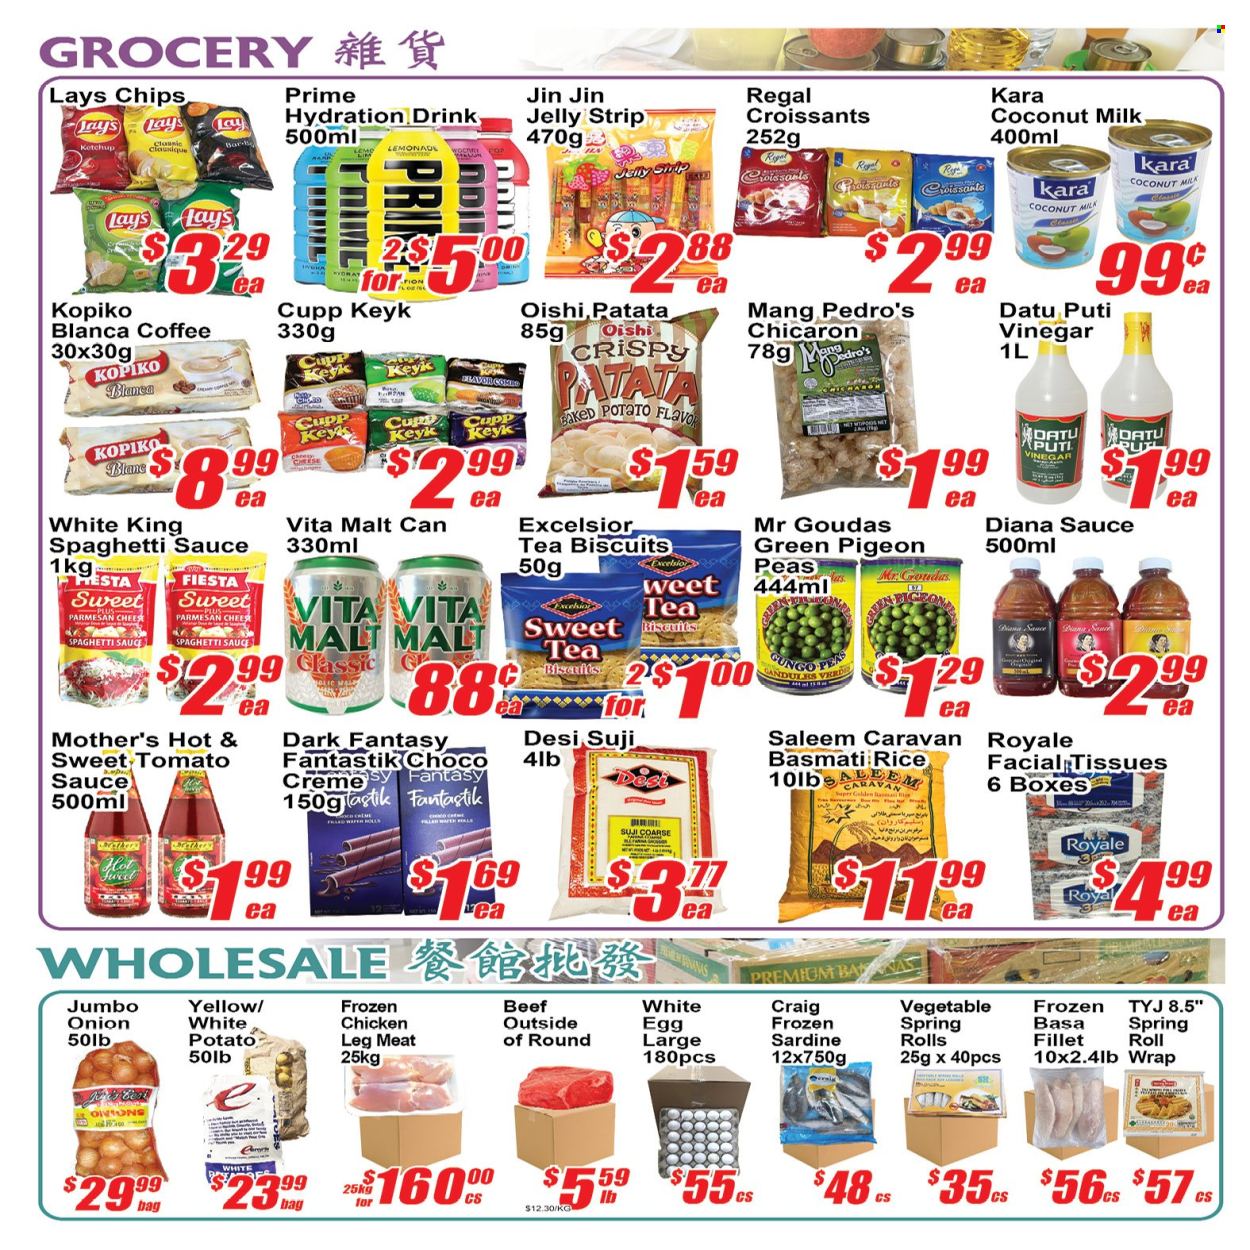 thumbnail - Jian Hing Supermarket Flyer - June 28, 2024 - July 04, 2024 - Sales products - croissant, peas, fish fillets, spaghetti, pasta, spring rolls, spaghetti sauce, ready meal, parmesan, jelly, plant-based milk, eggs, wafers, biscuit, Lay’s, malt, coconut milk, tomato sauce, basmati rice, toor dal, ketchup, lemonade, coffee, chicken legs, chicken. Page 4.